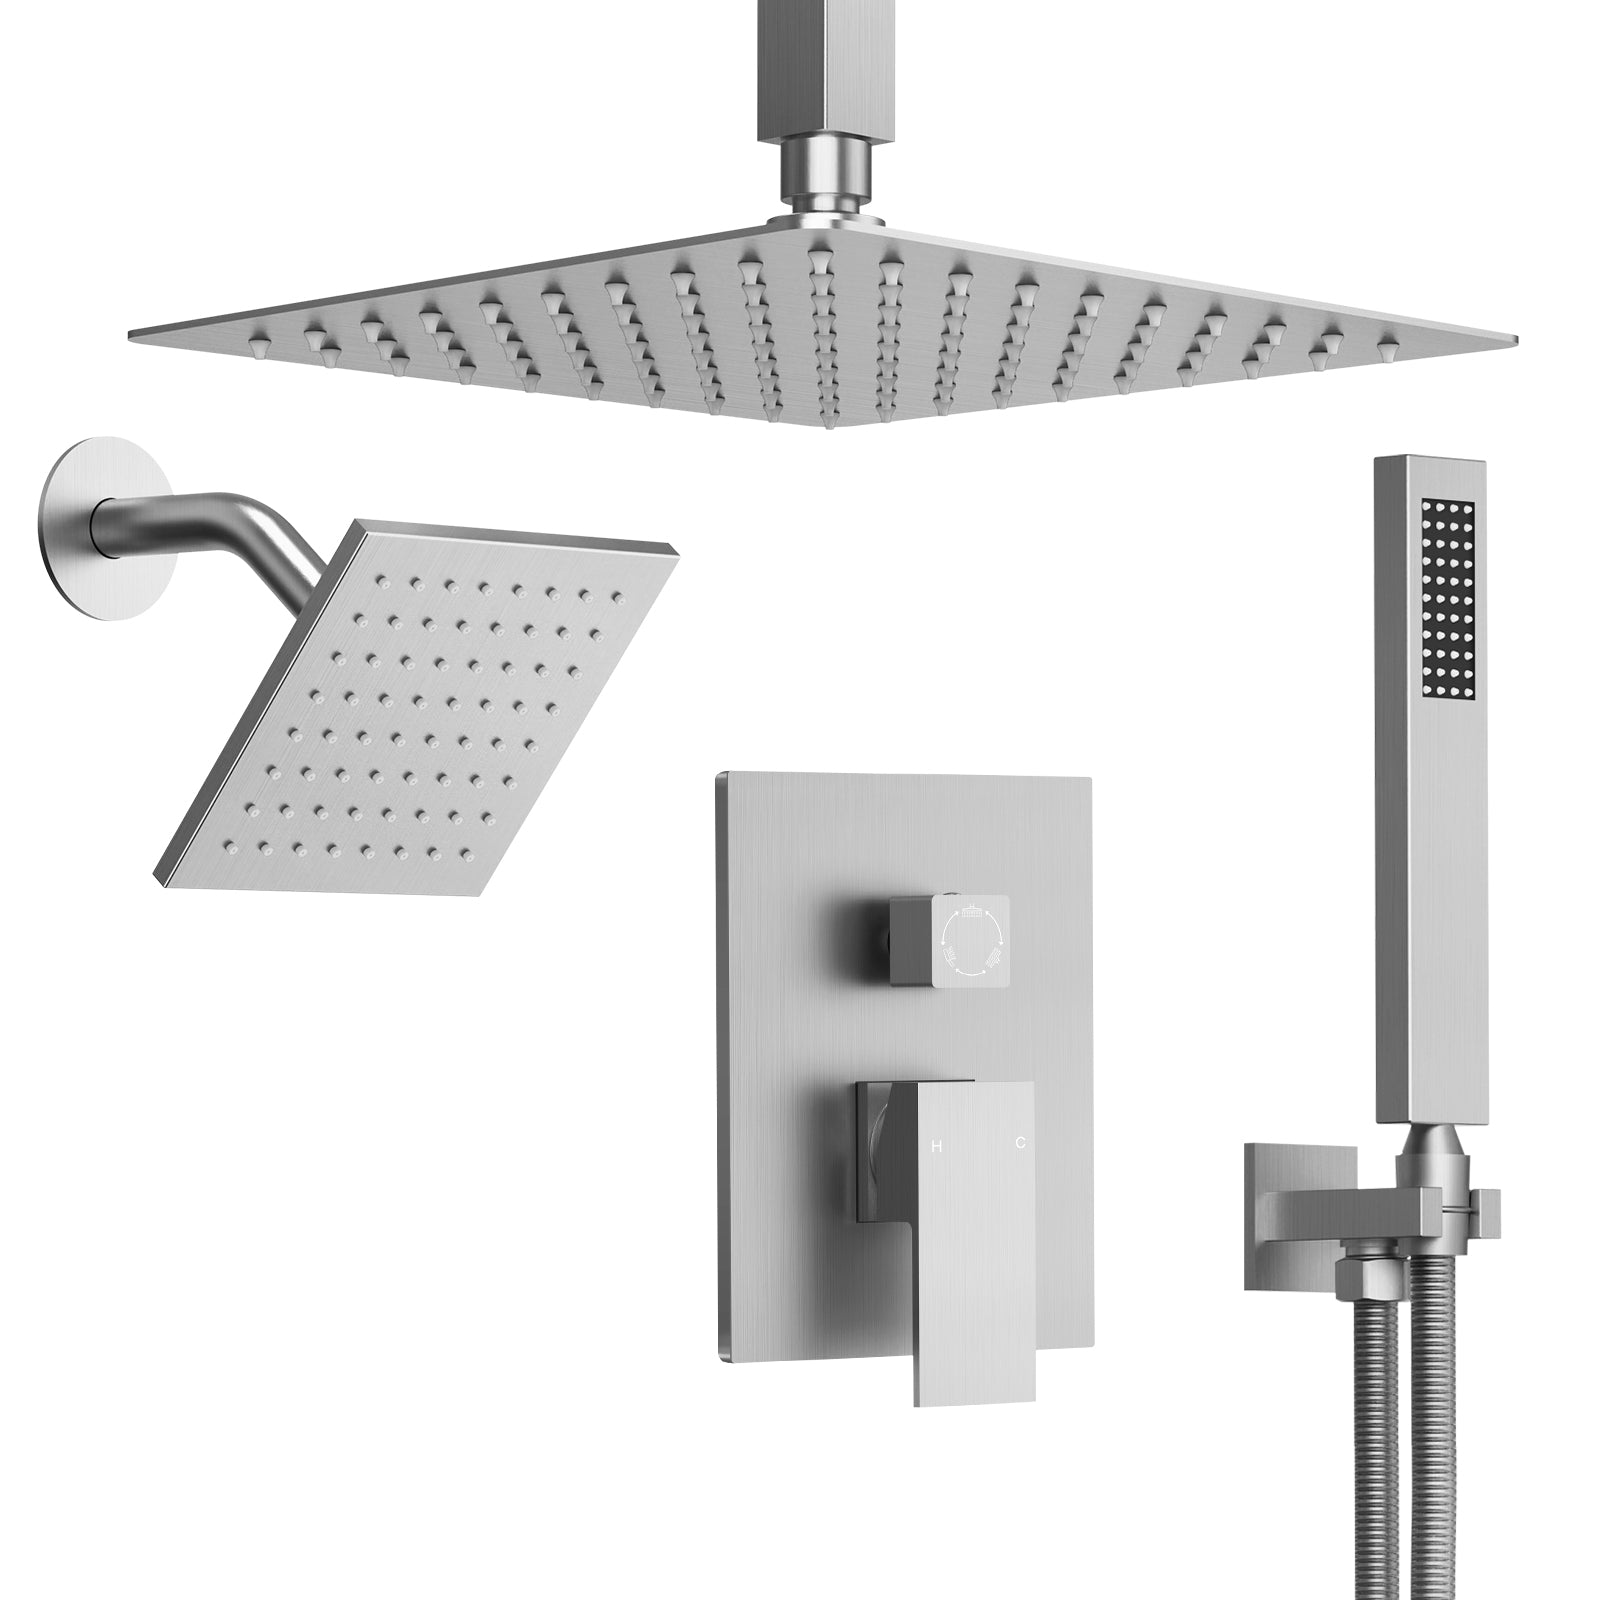 EVERSTEIN Luxury Rainfall Dual Shower Heads with Handheld Spray: 10-inch Ceiling Square, High-Pressure Luxury Shower Fixtures